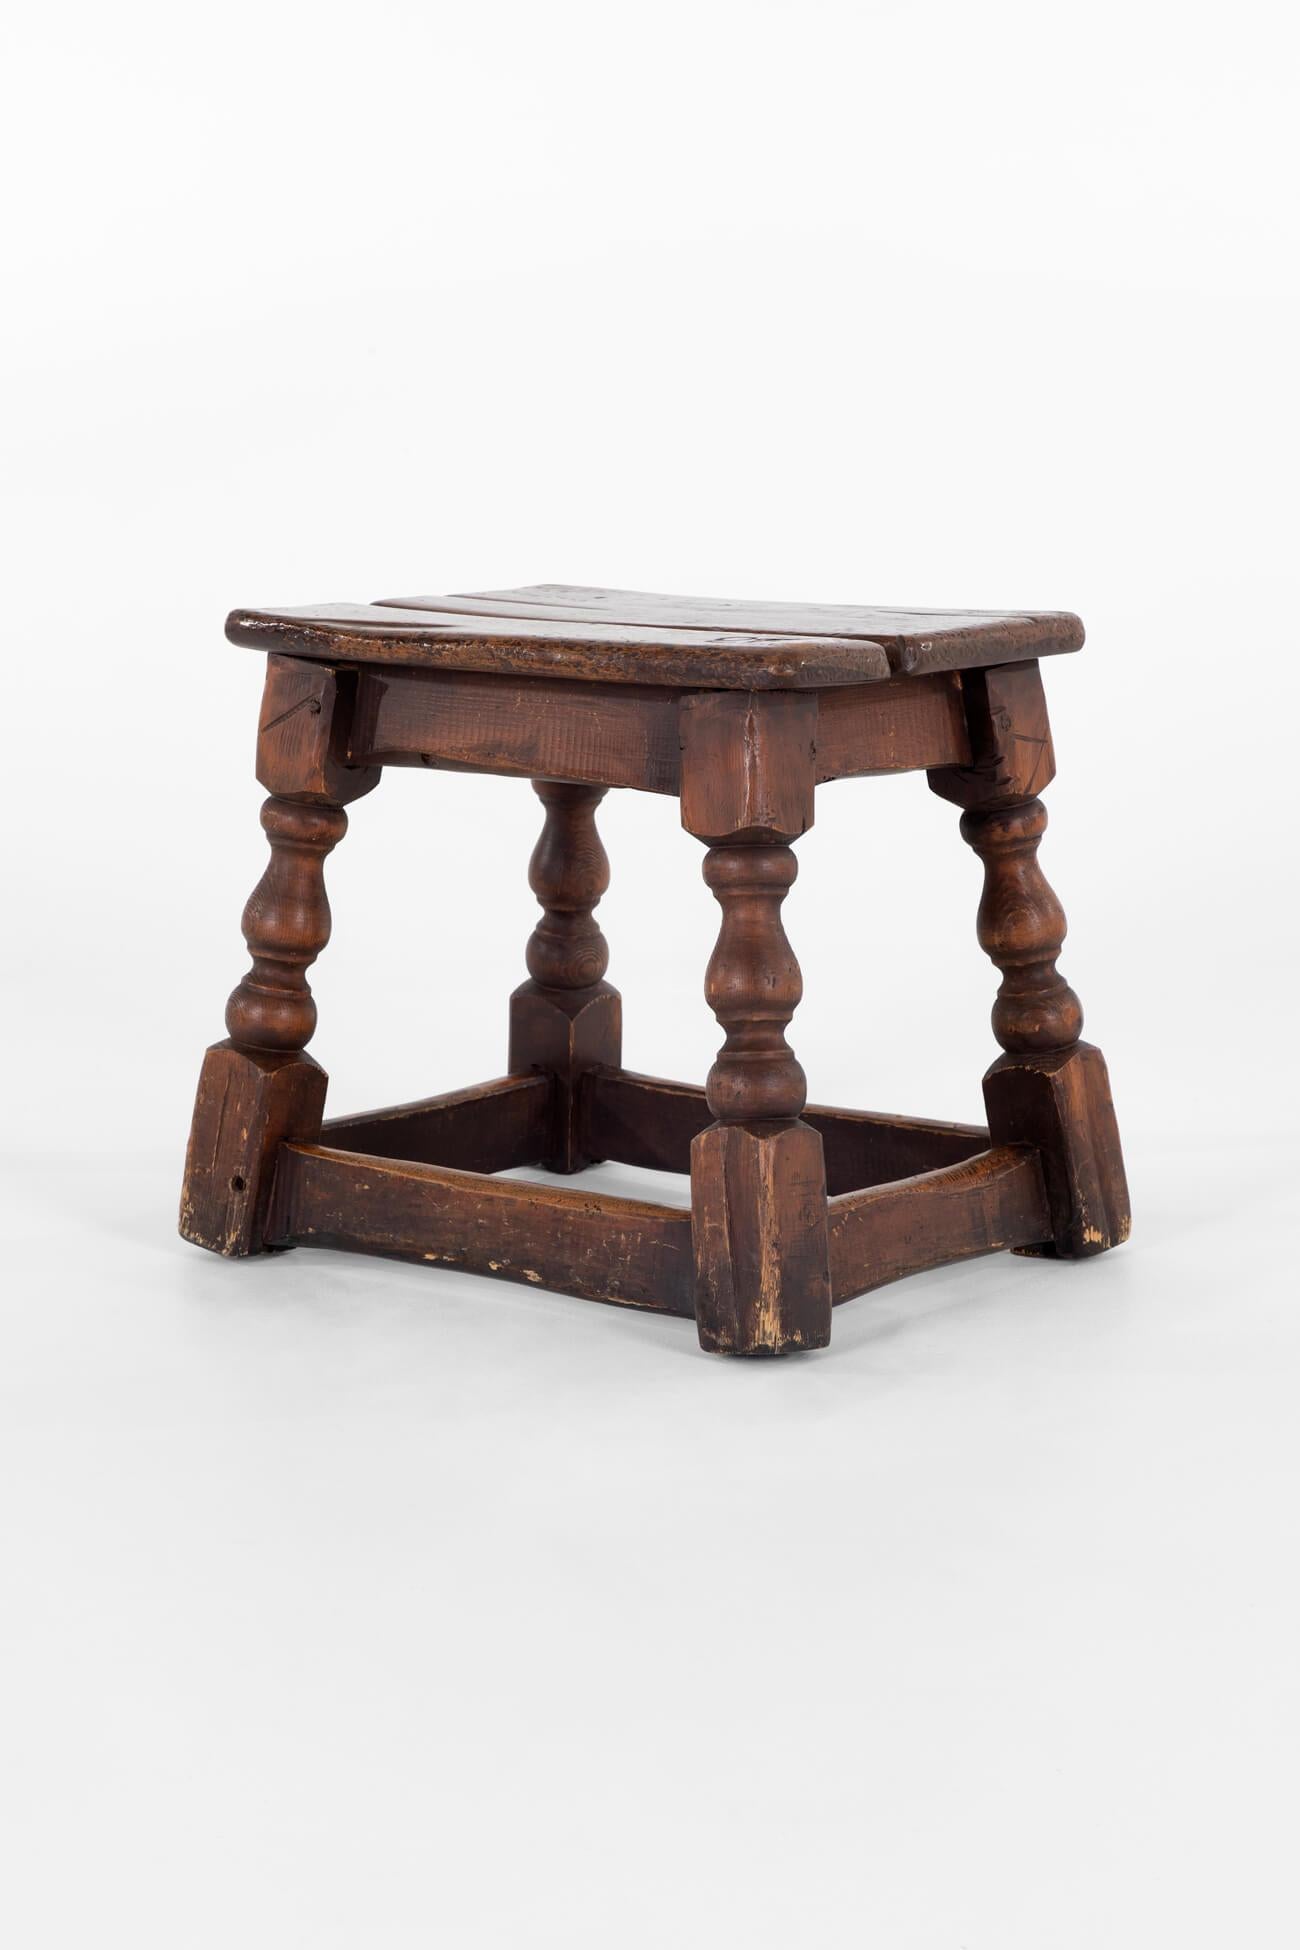 A charming 18th-century low oak stool.

The characterful two-plank top is raised upon four sweeping turned legs finishing on block feet and united by a peripheral stretcher.

Great colour and patination with an interesting branding or carving to the